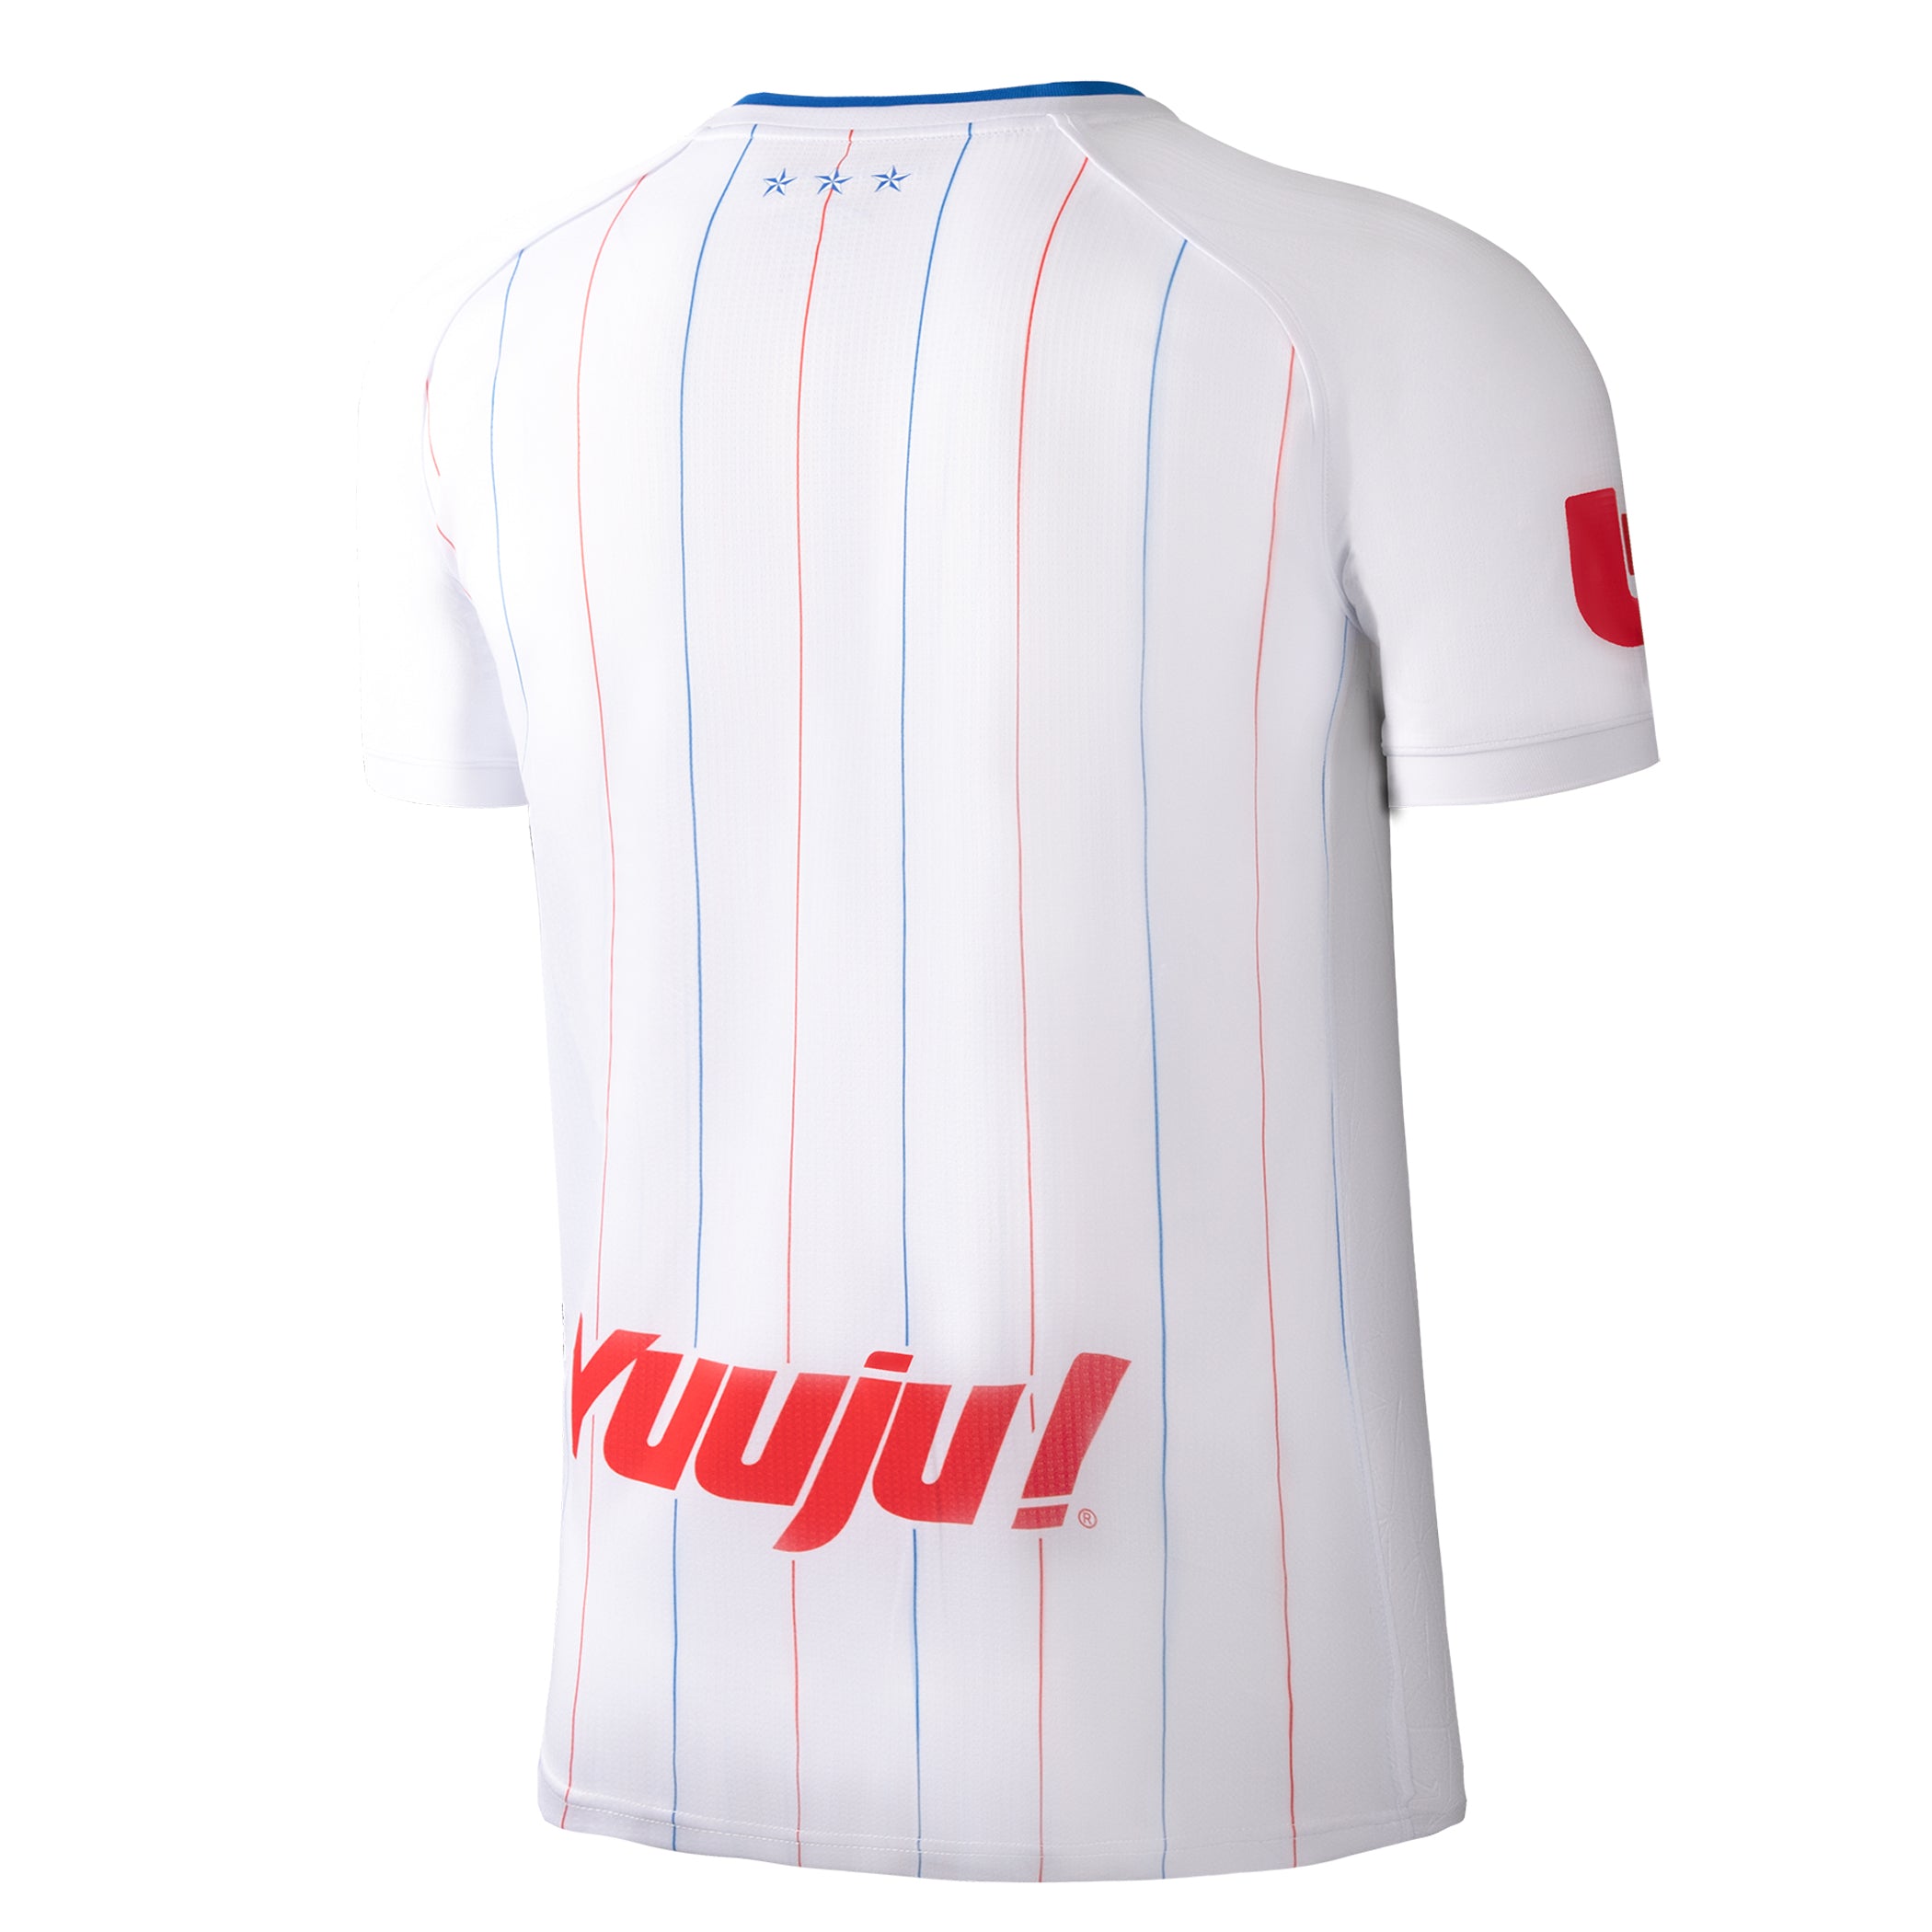 24-25 OLIMPIA HOME JERSEY